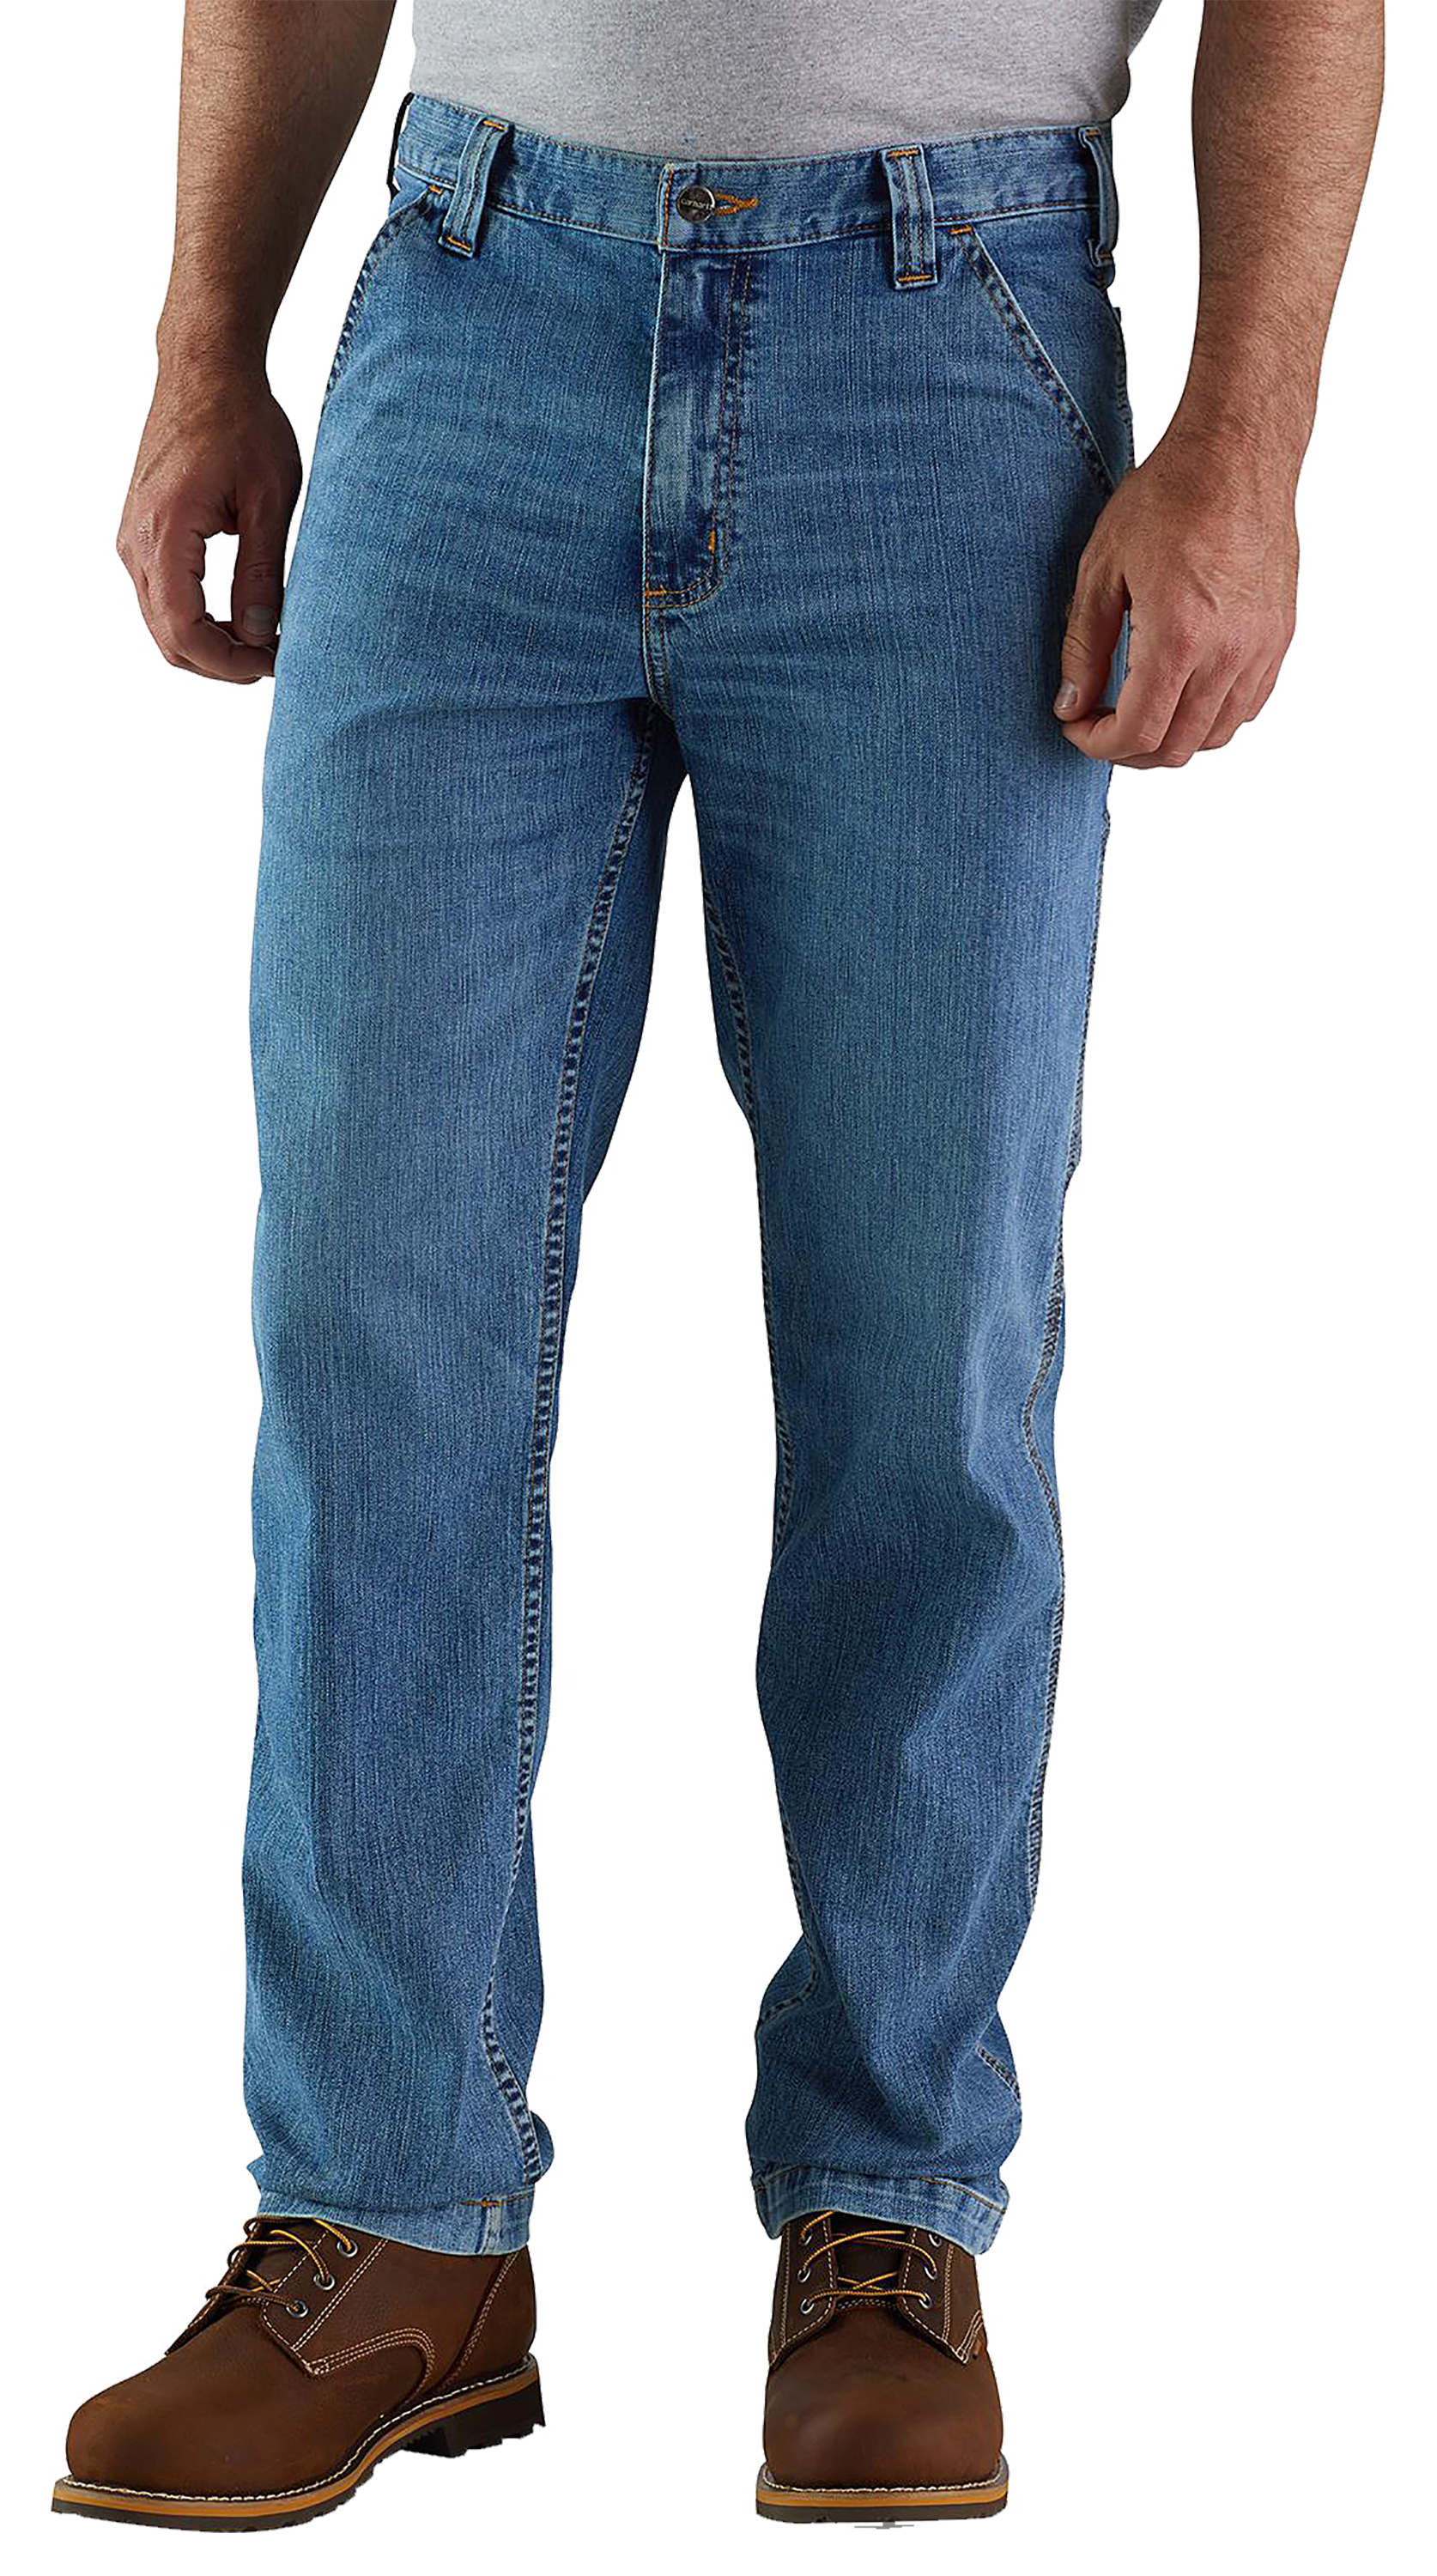 Carhartt Men's Rugged Flex Relaxed Fit Utility Five Pocket Jean -  Traditions Clothing & Gift Shop